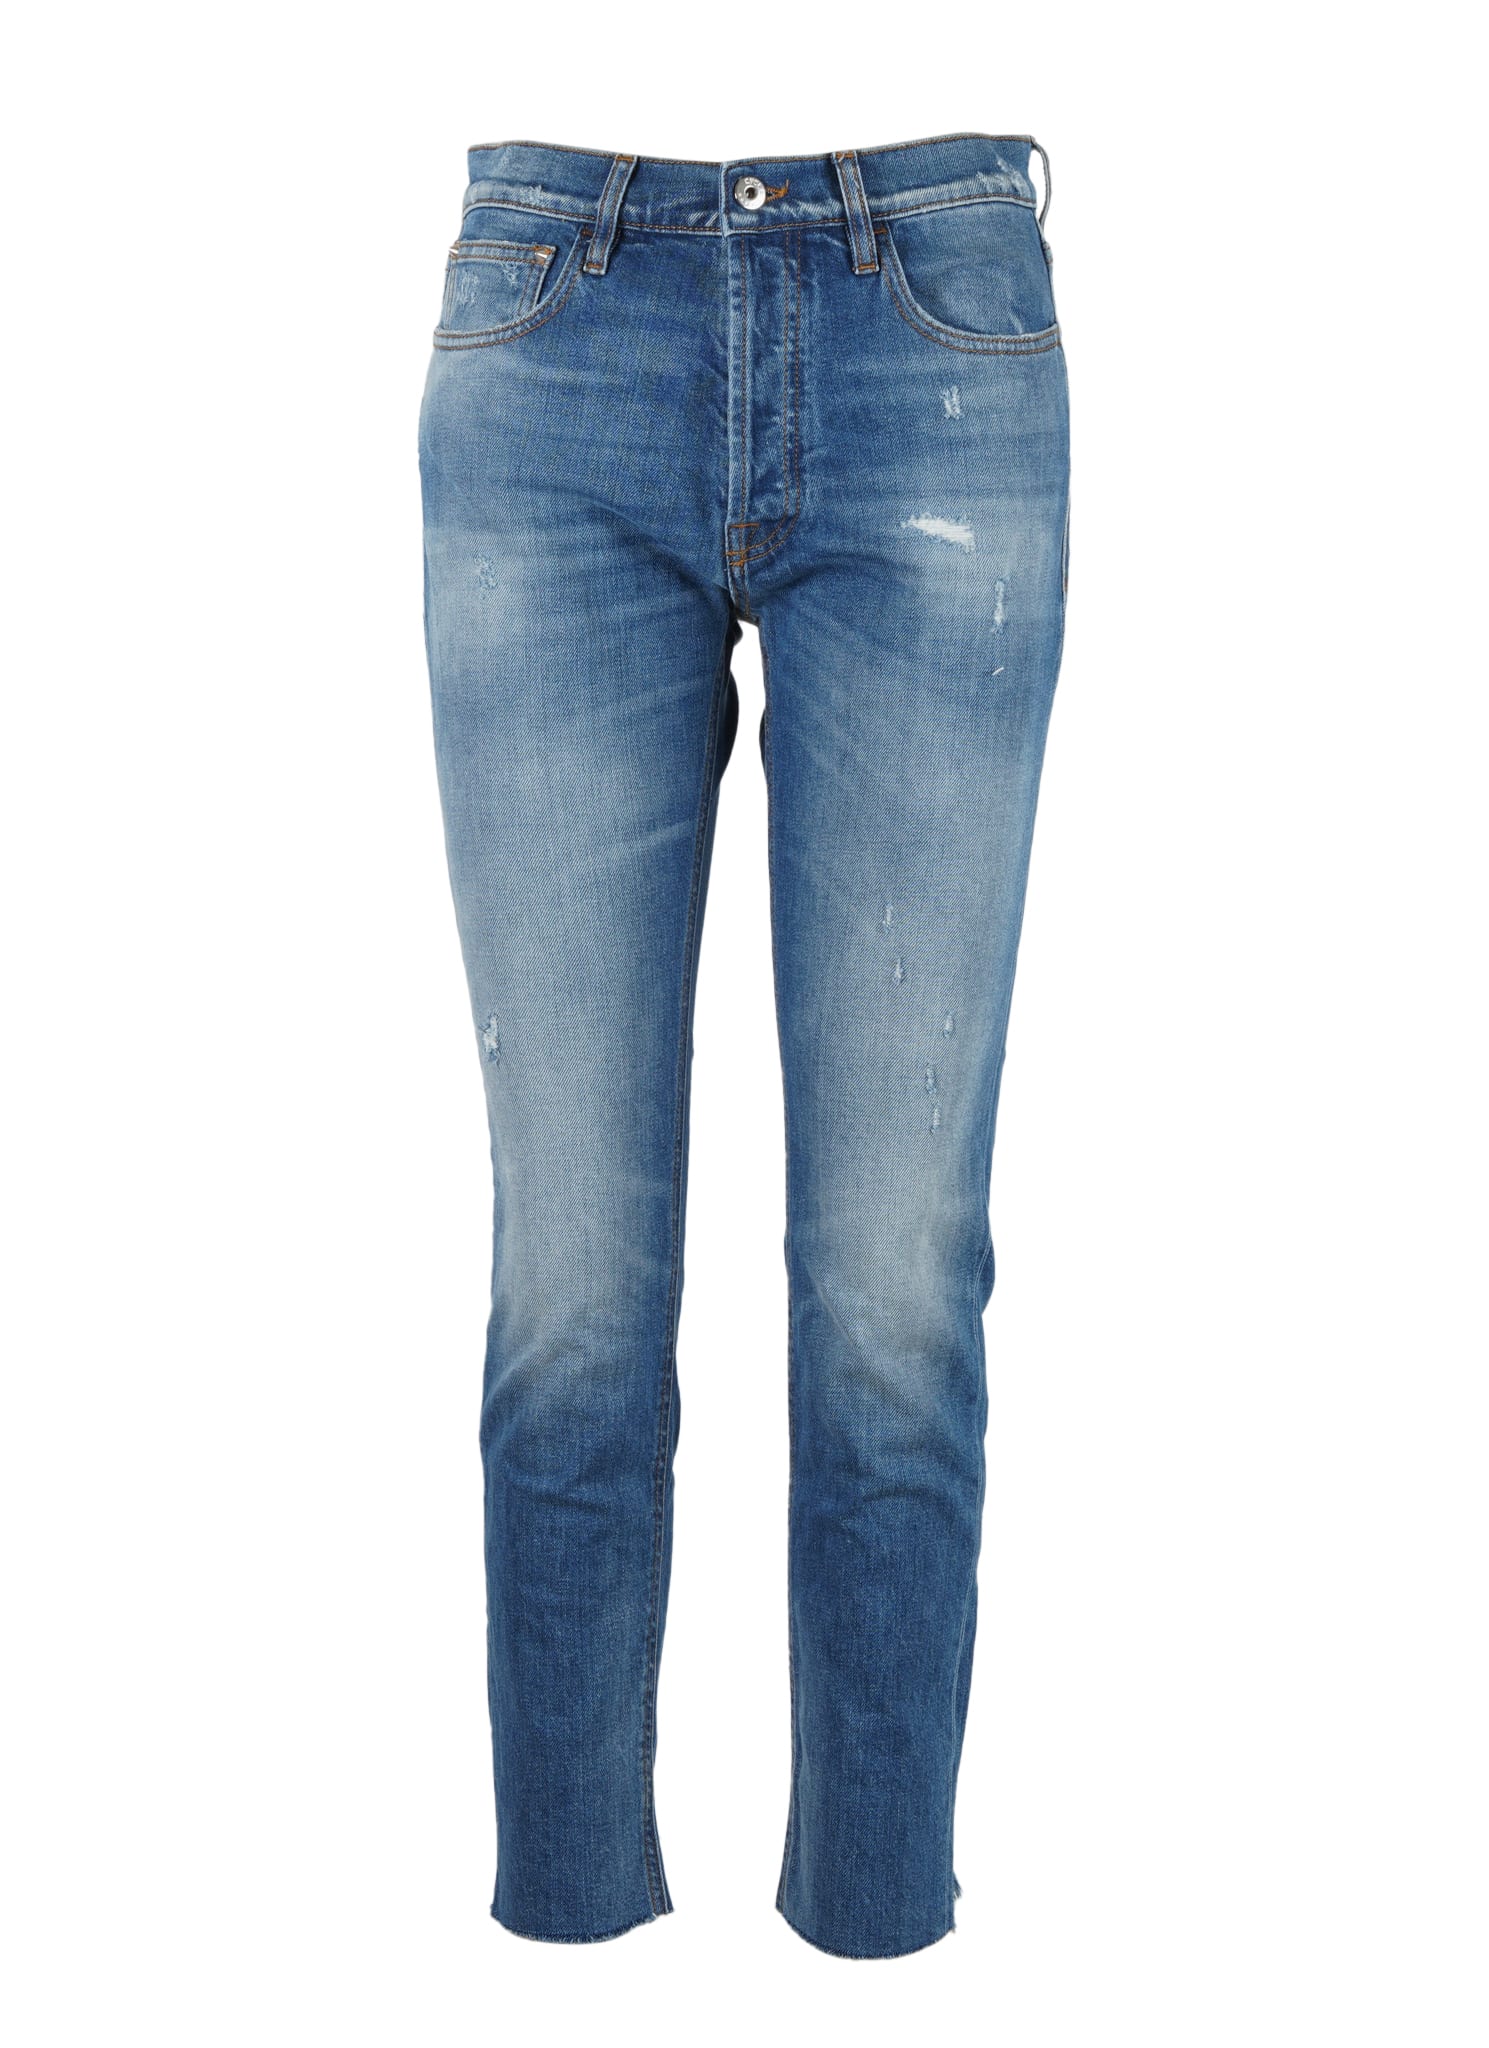 Cycle Body Slim High Rise Jeans